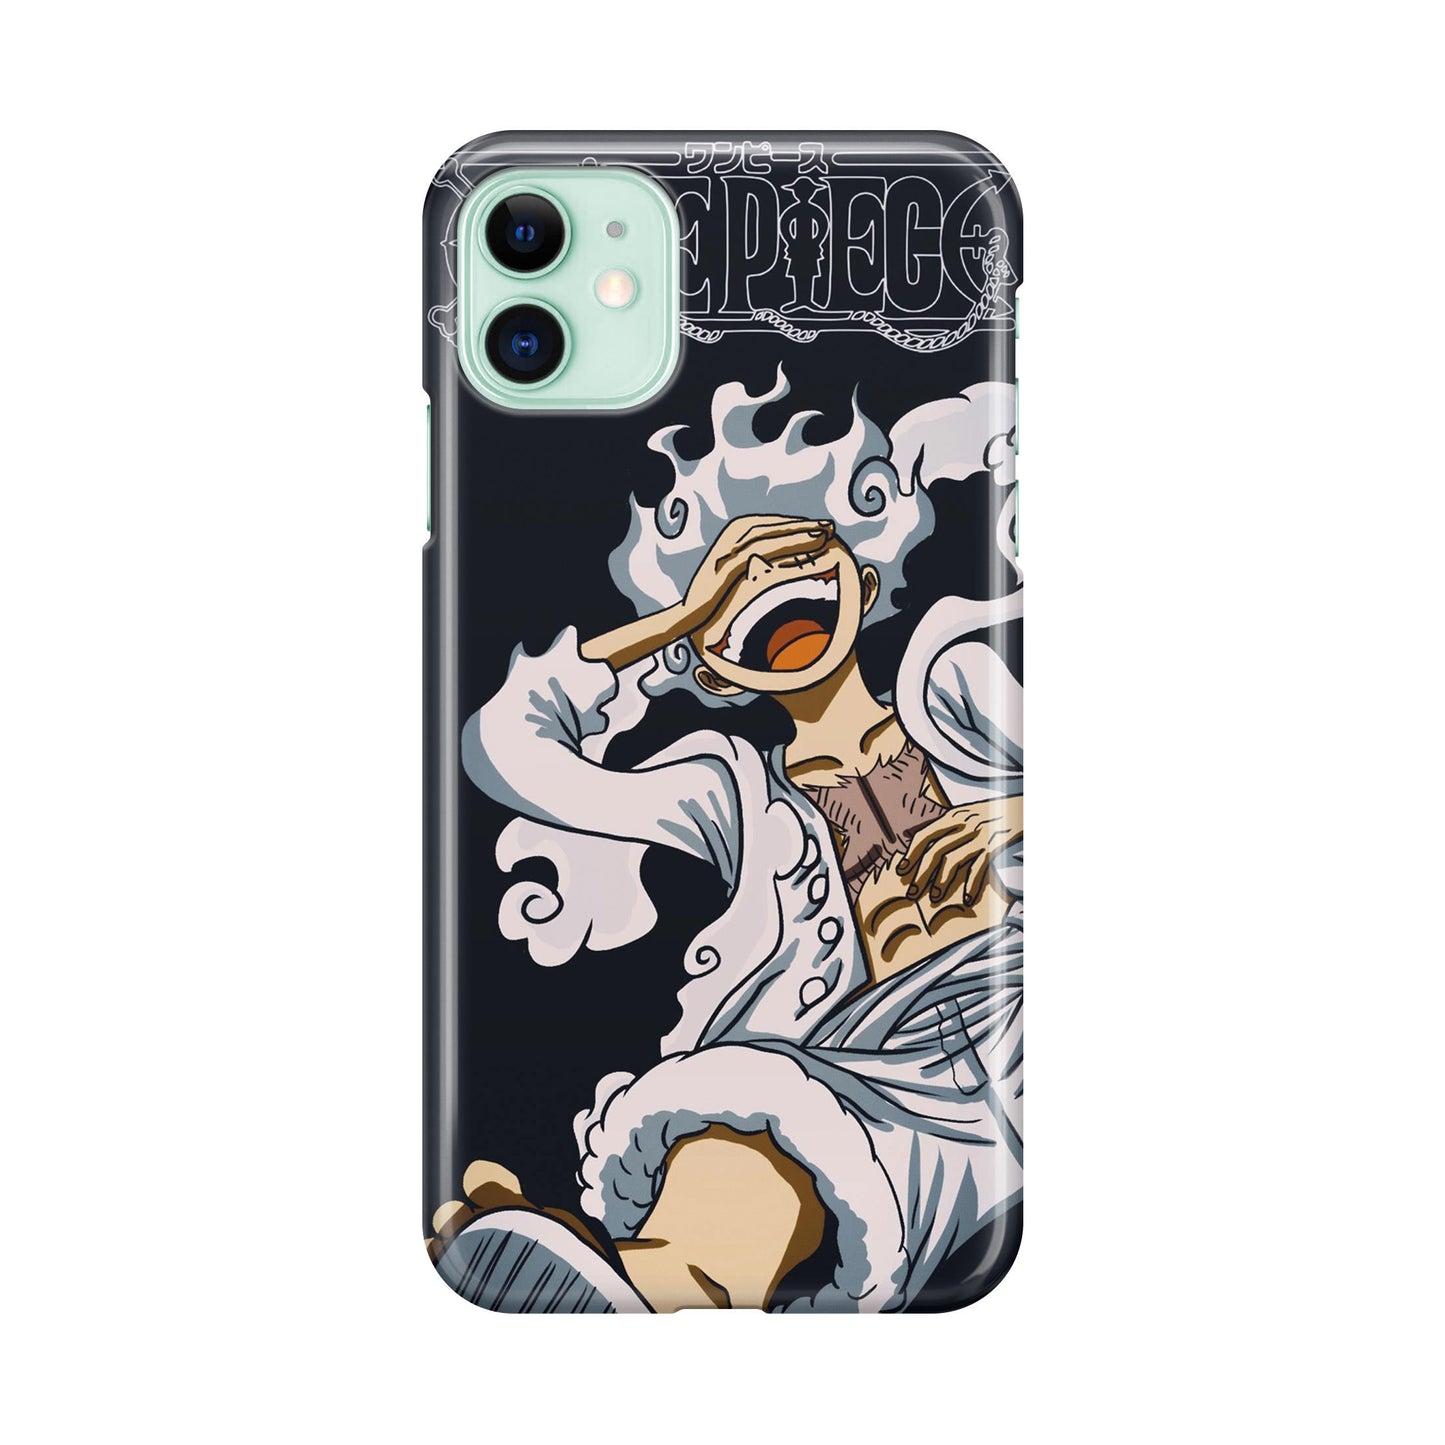 Gear 5 Iconic Laugh iPhone 12 Case